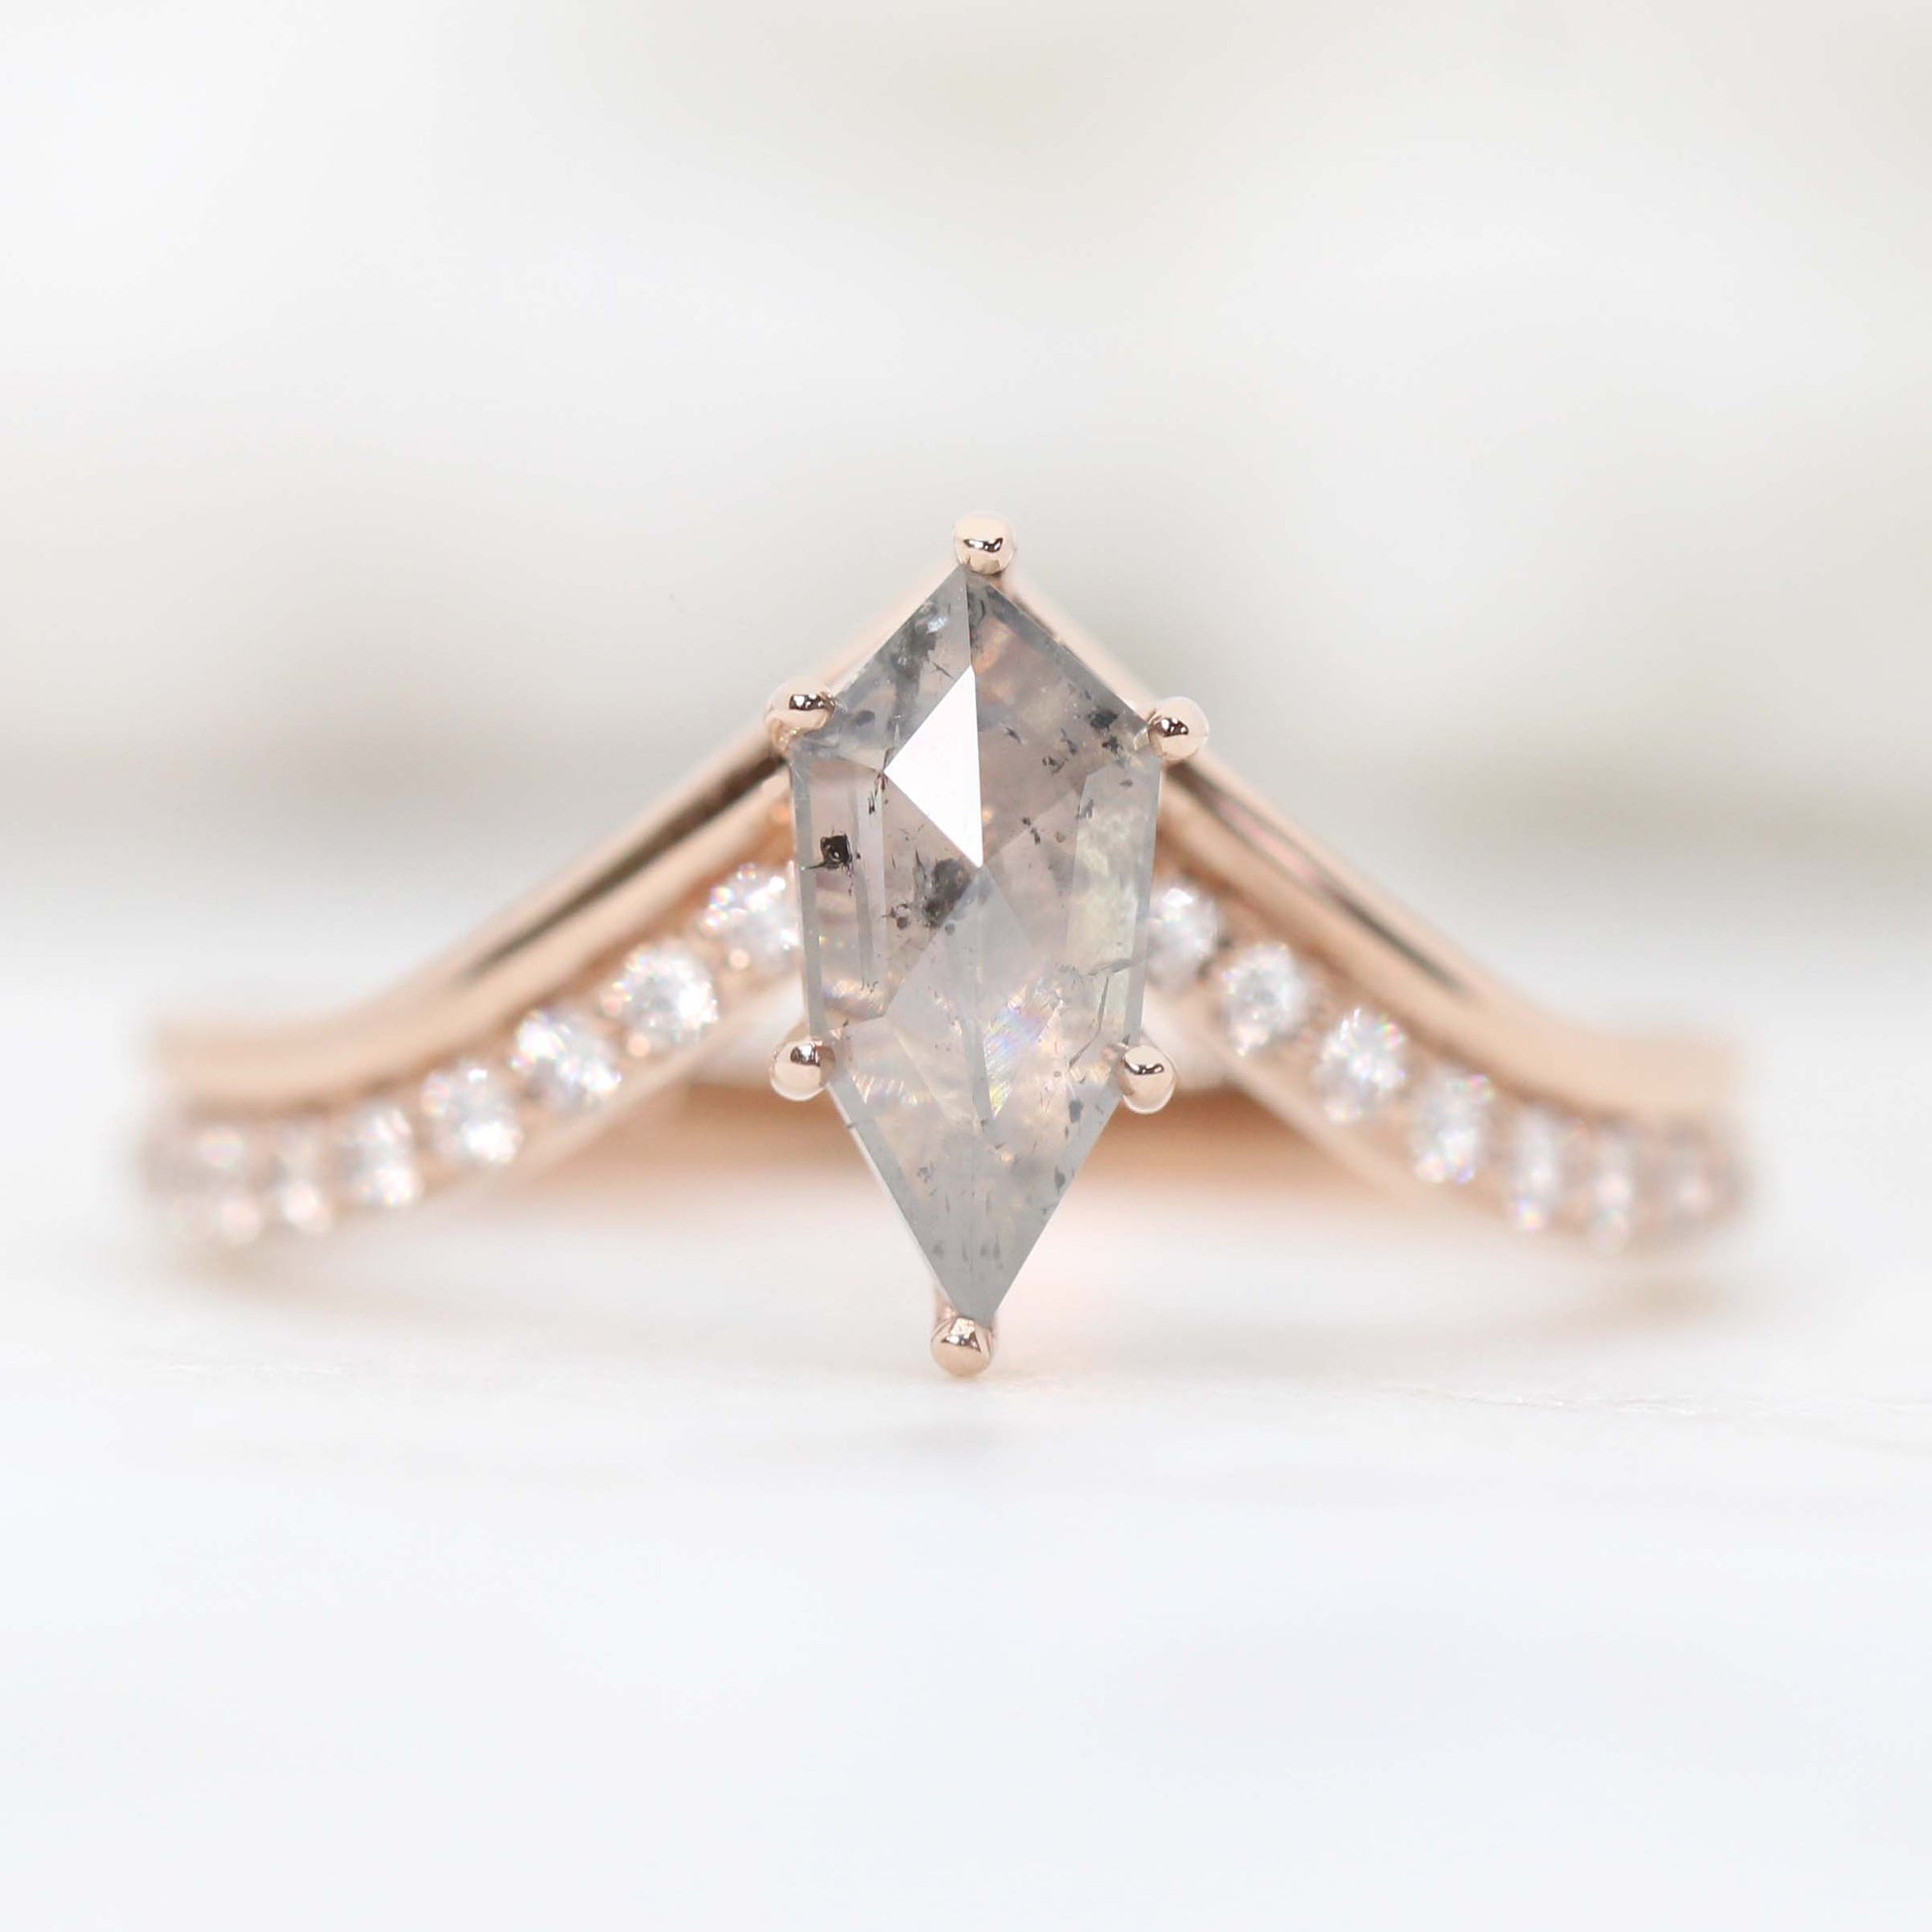 CAELEN (M) Zahra Ring with a 0.85 Carat Stormy Gray Shield Celestial Diamond and White Accent Diamonds in 14k Rose Gold - Ready to Size and Ship - Midwinter Co. Alternative Bridal Rings and Modern Fine Jewelry